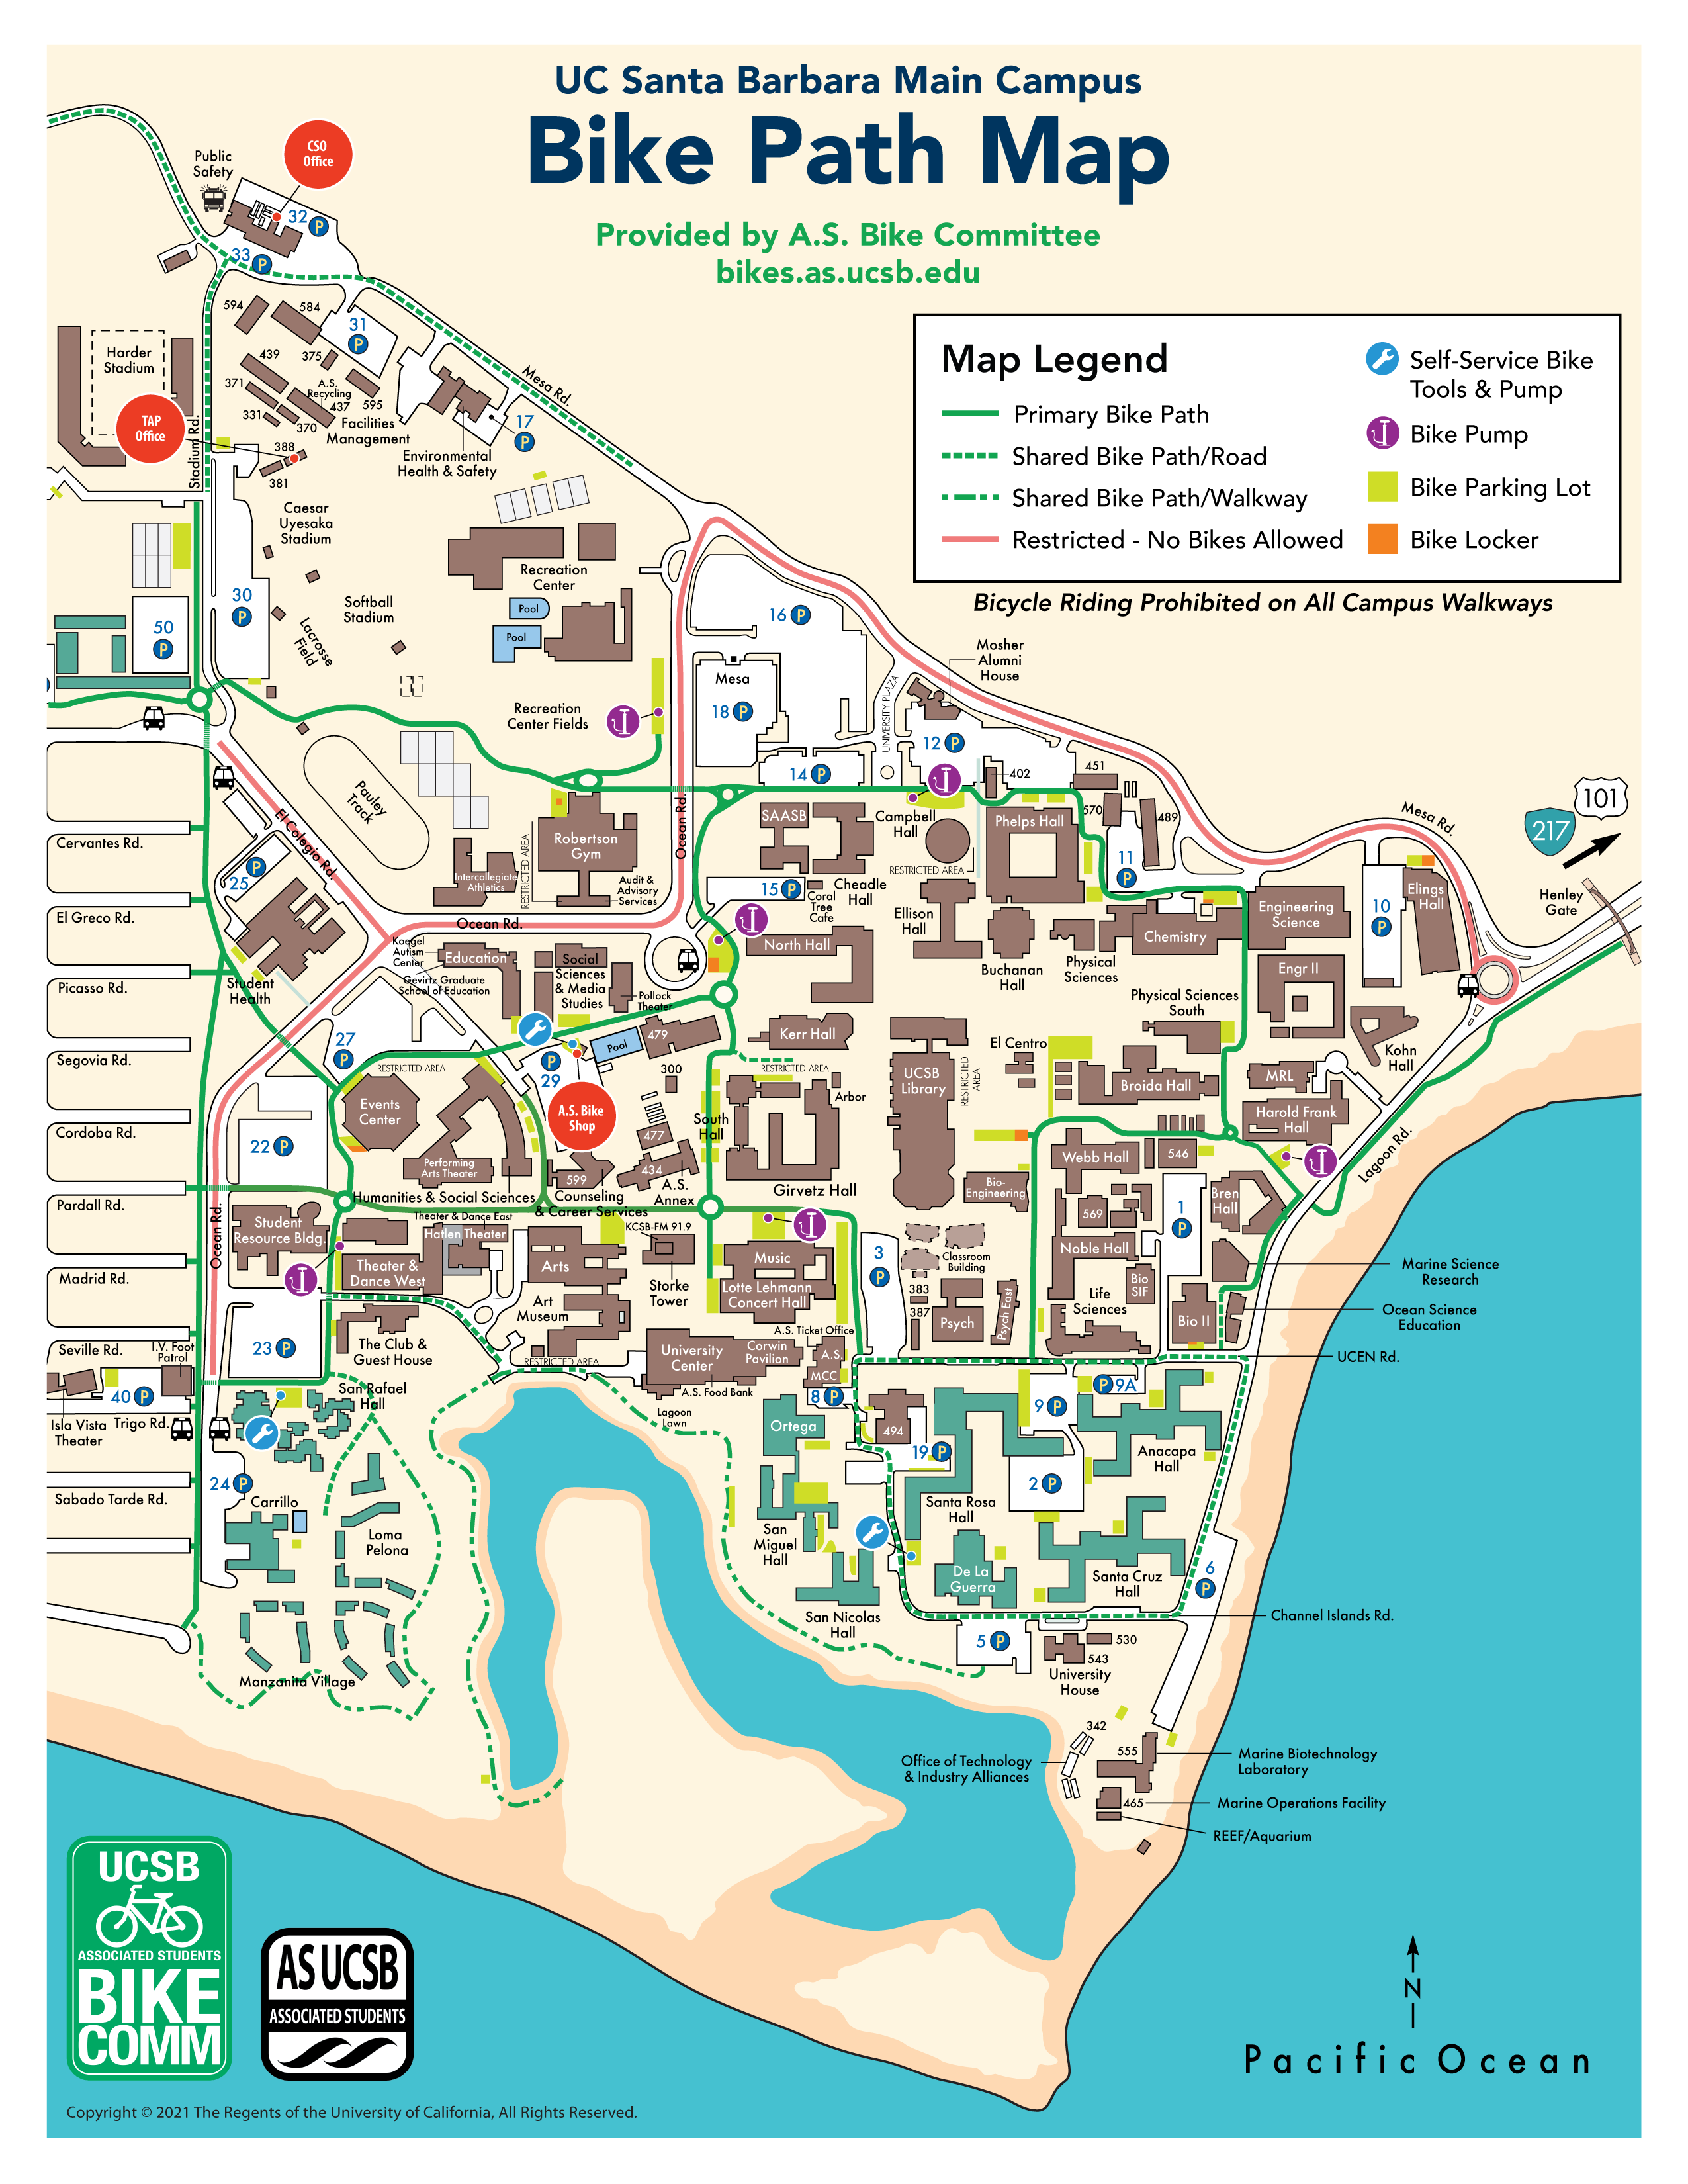 A map of the UCSB campus bike paths and lots